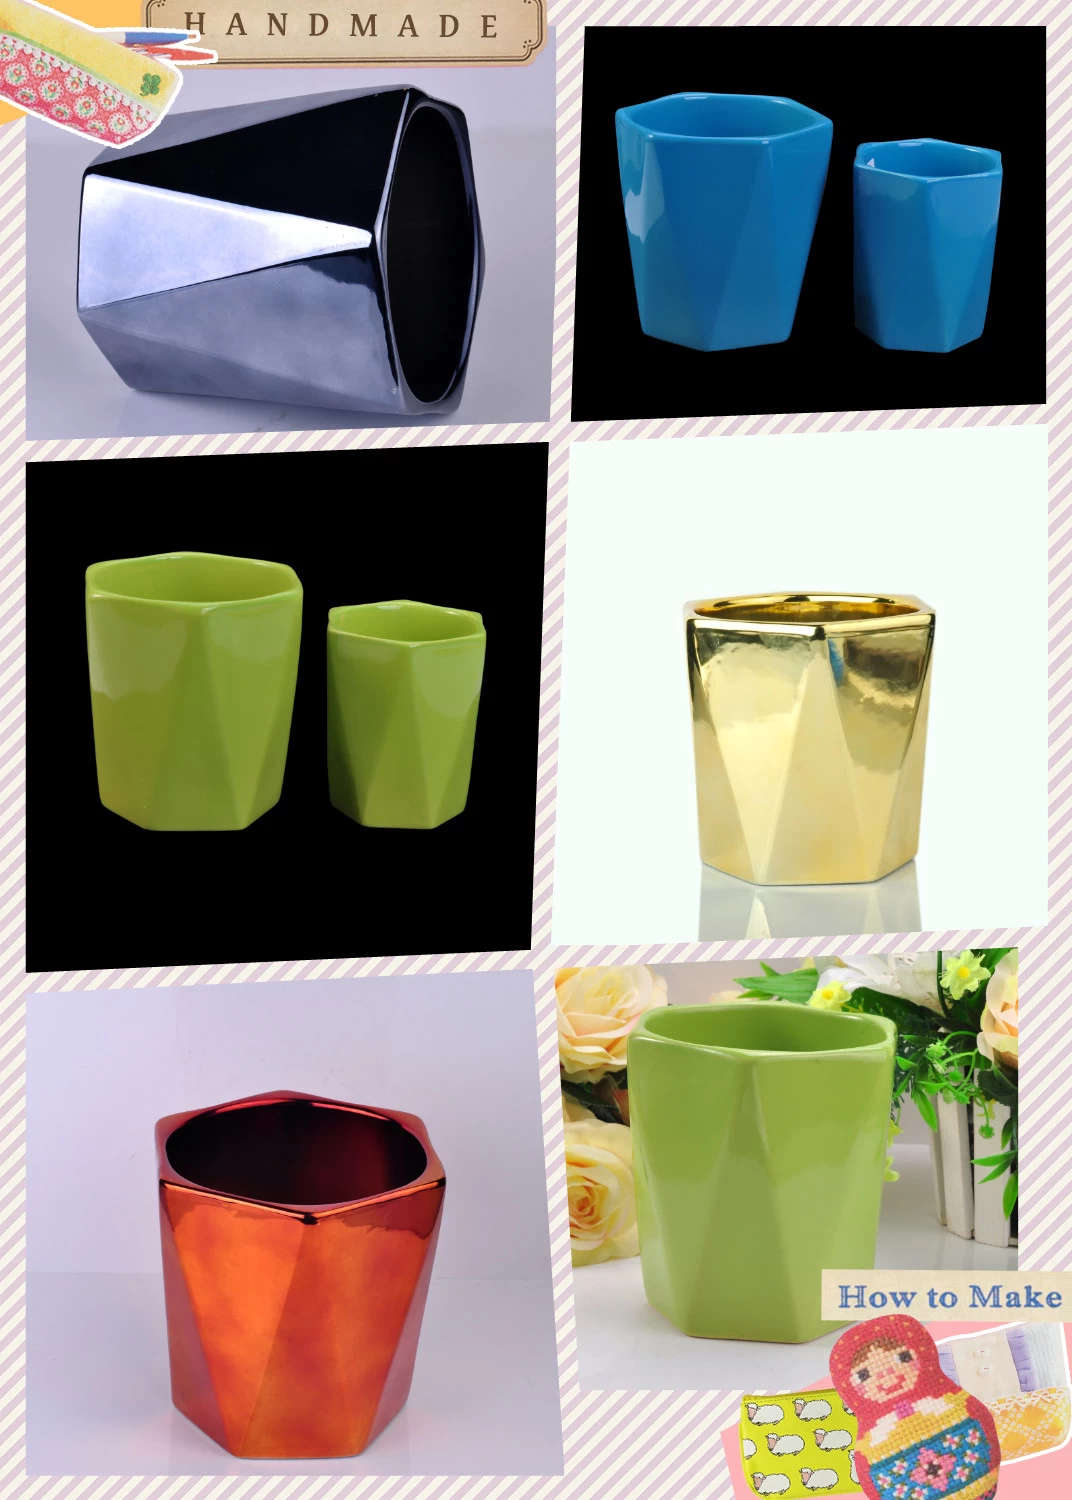 Please Look! 2016 hot sale ceramic candle vessels